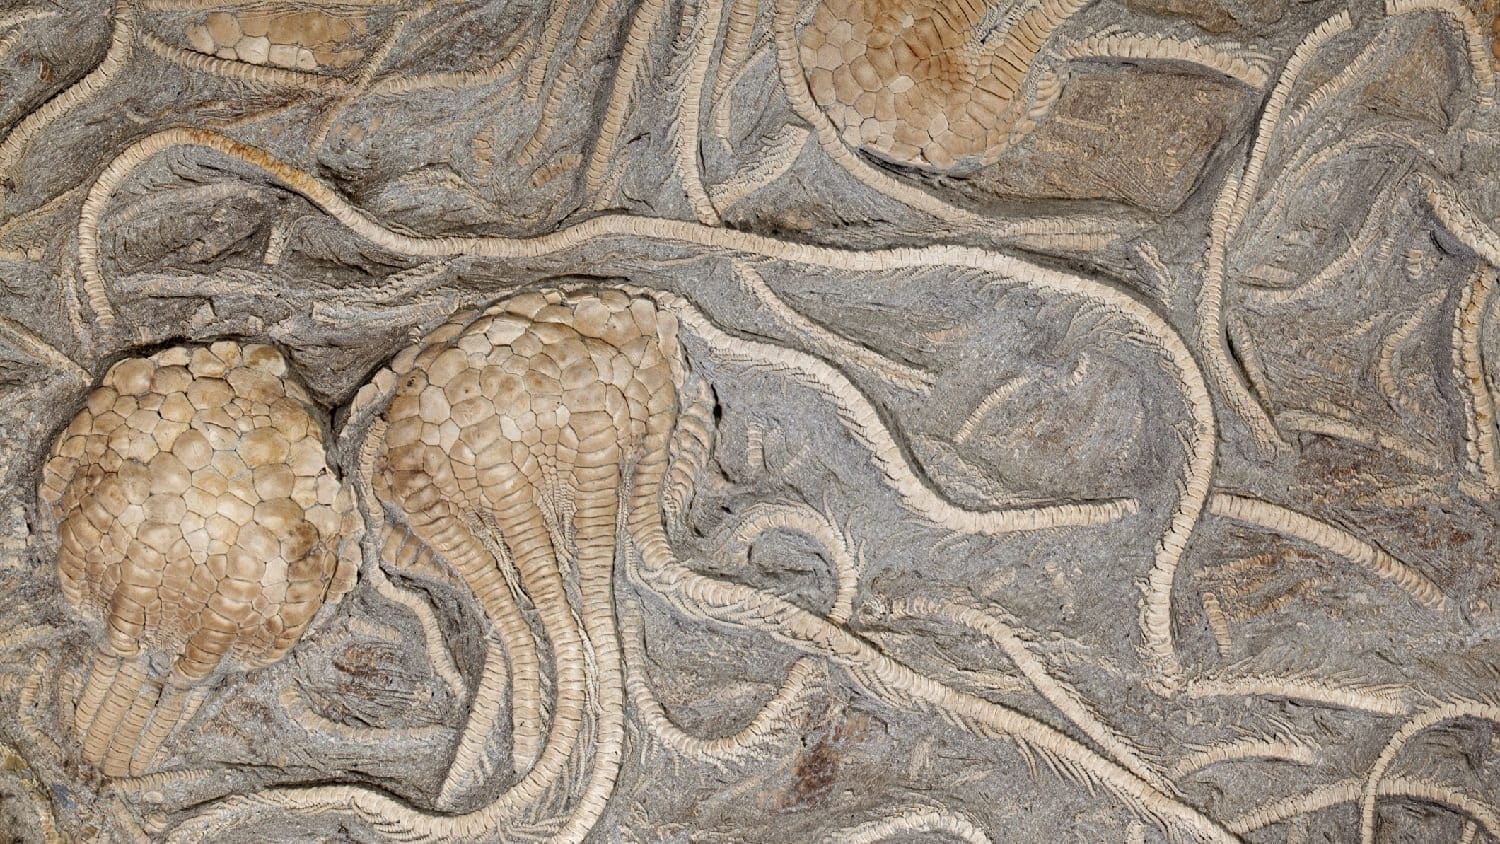 Complete Fossilized Crinoids: Photo 19004163 © Anthony Aneese Totah Jr | Dreamstime.com